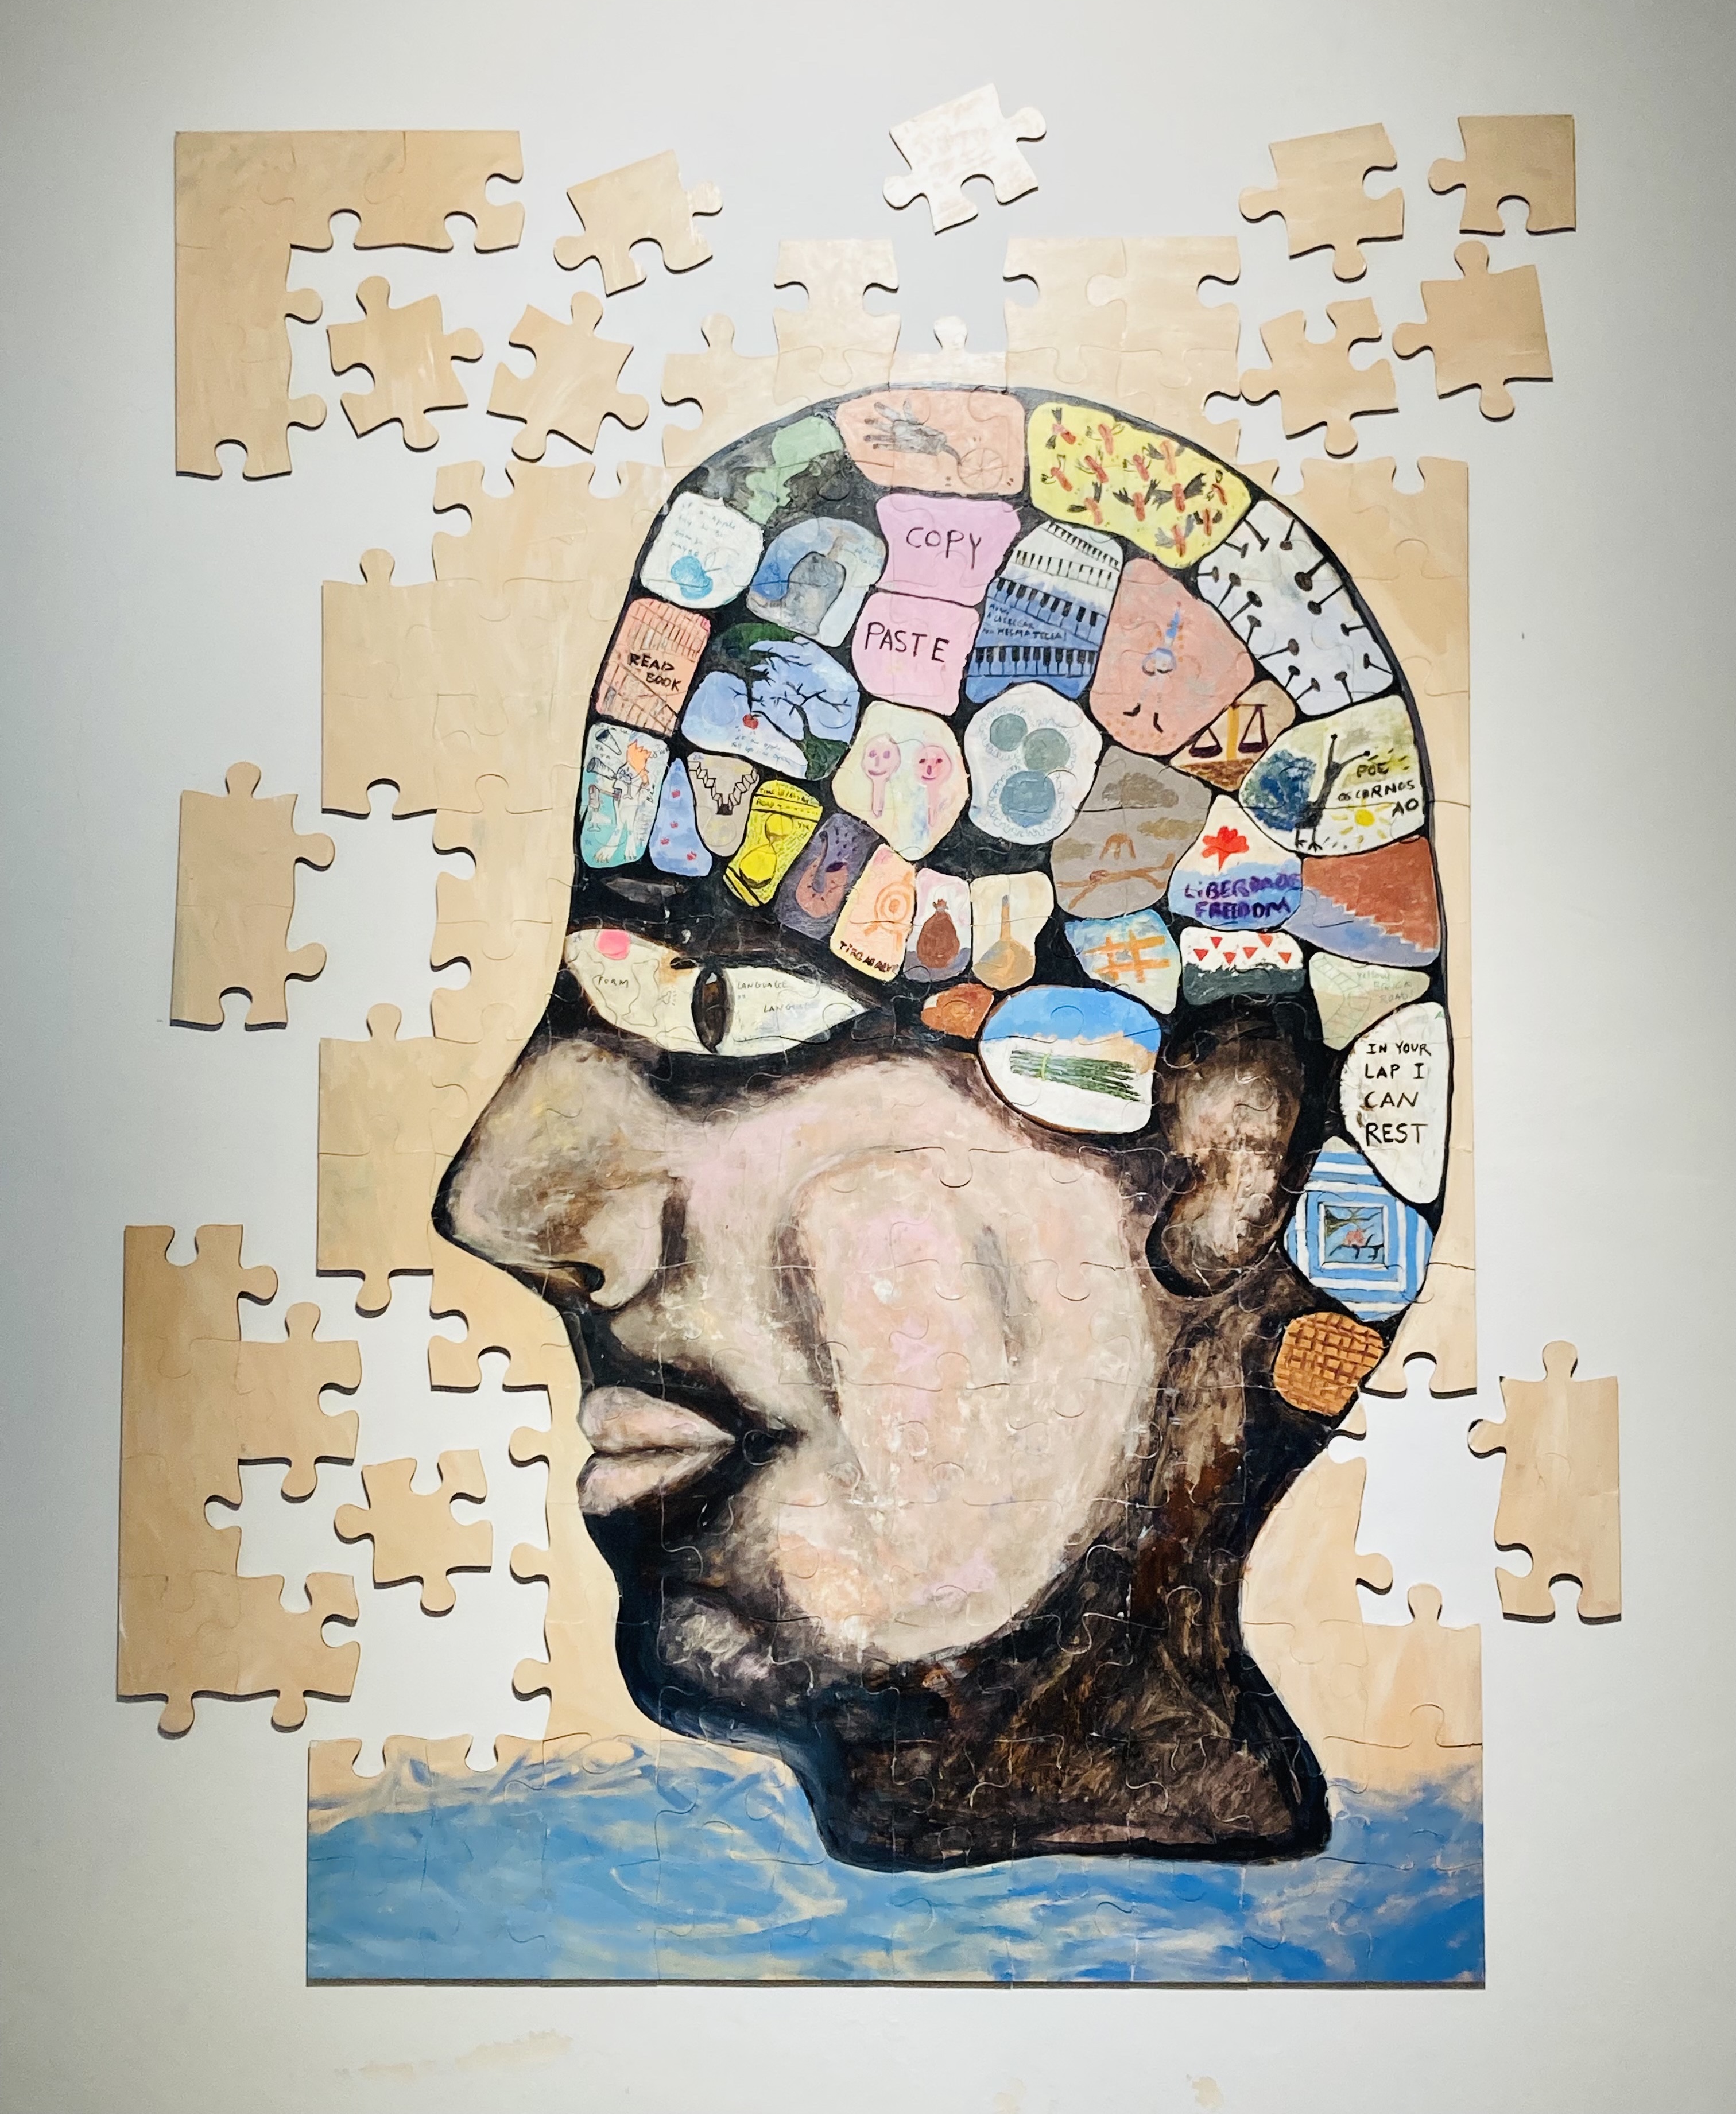 THE PUZZLE AND A HEAD TO ASSEMBLE